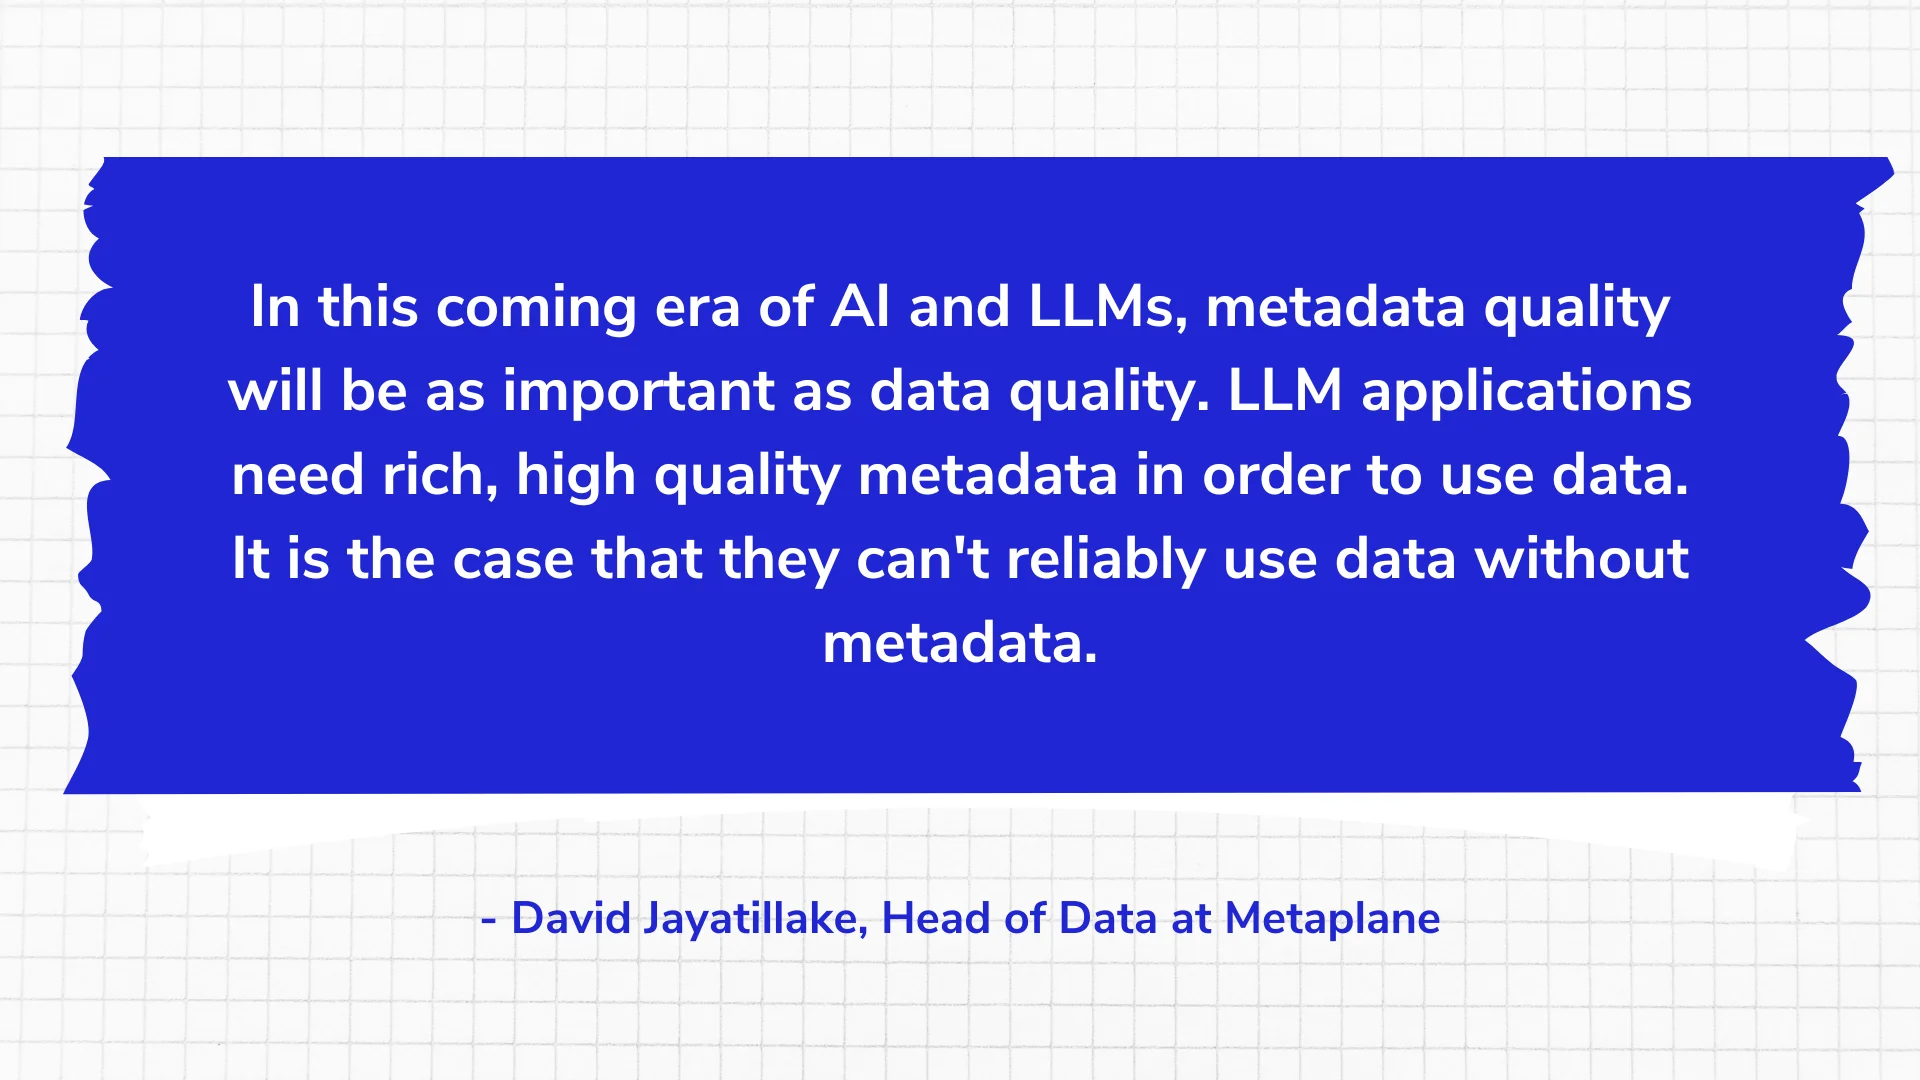 In this coming era of AI and LLMs, metadata quality will be as important as data quality